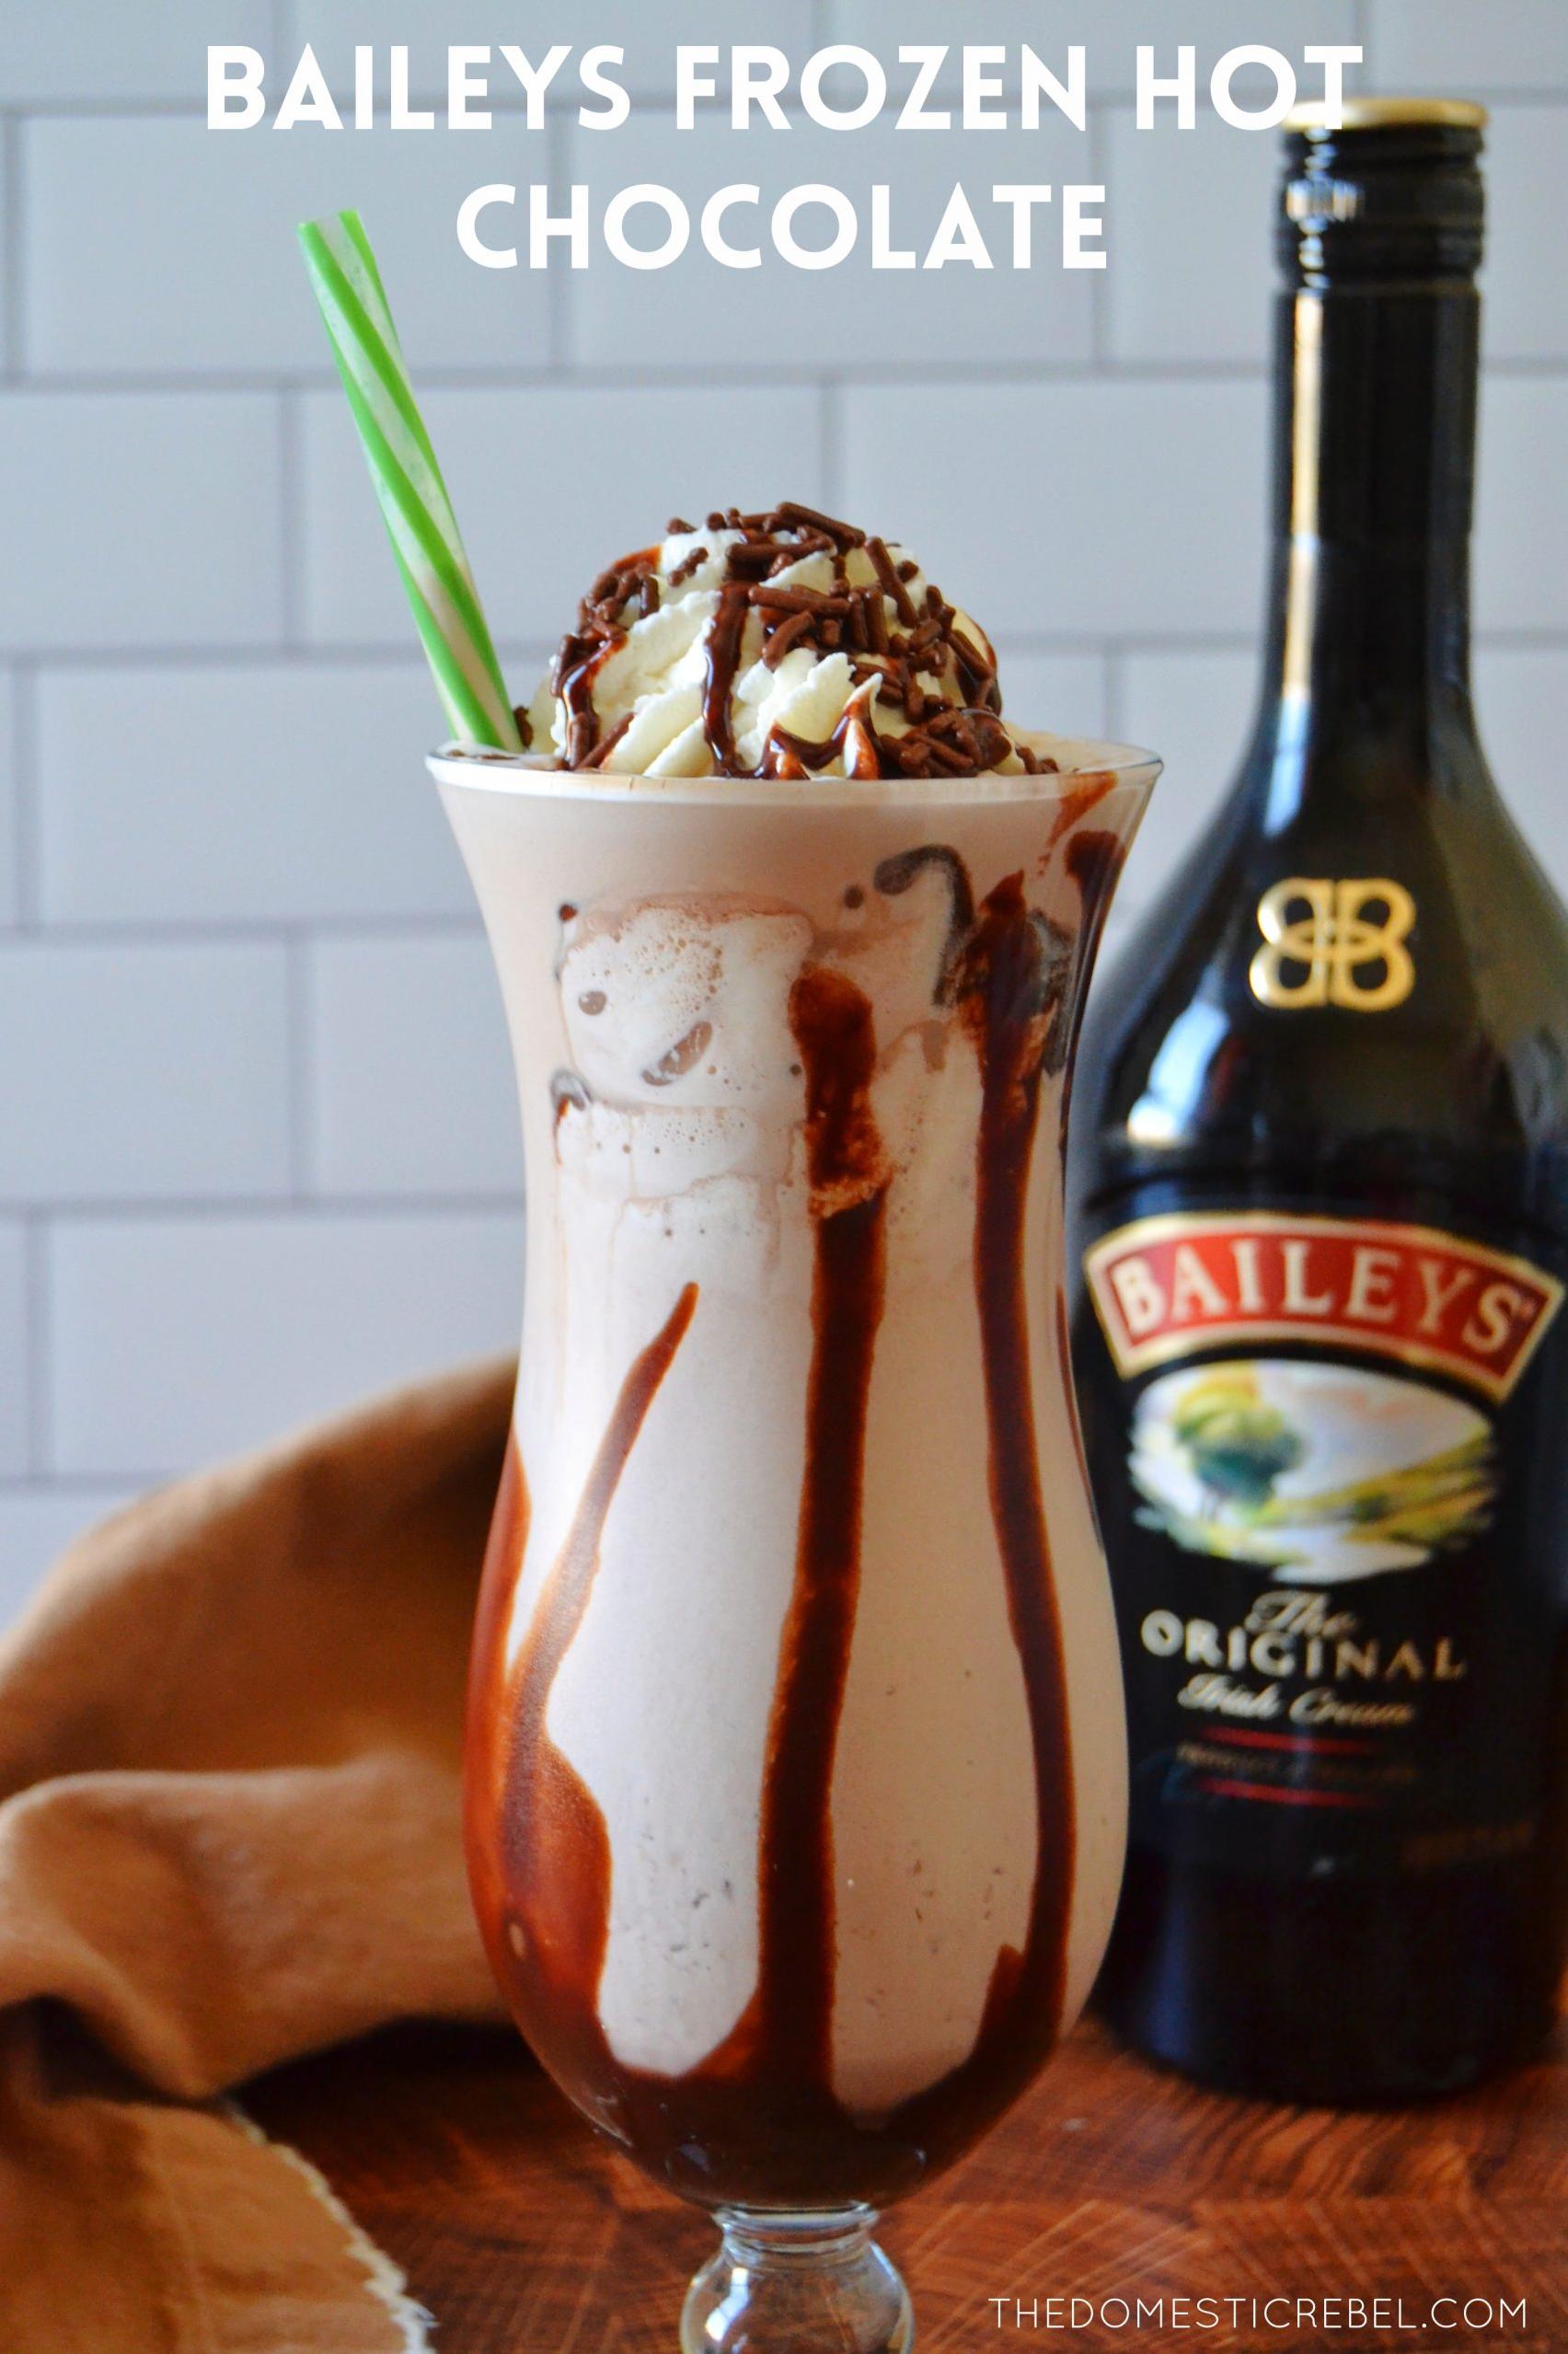  Get ready to indulge in some creamy, flavorful goodness with this homemade Baileys Irish Cream recipe.